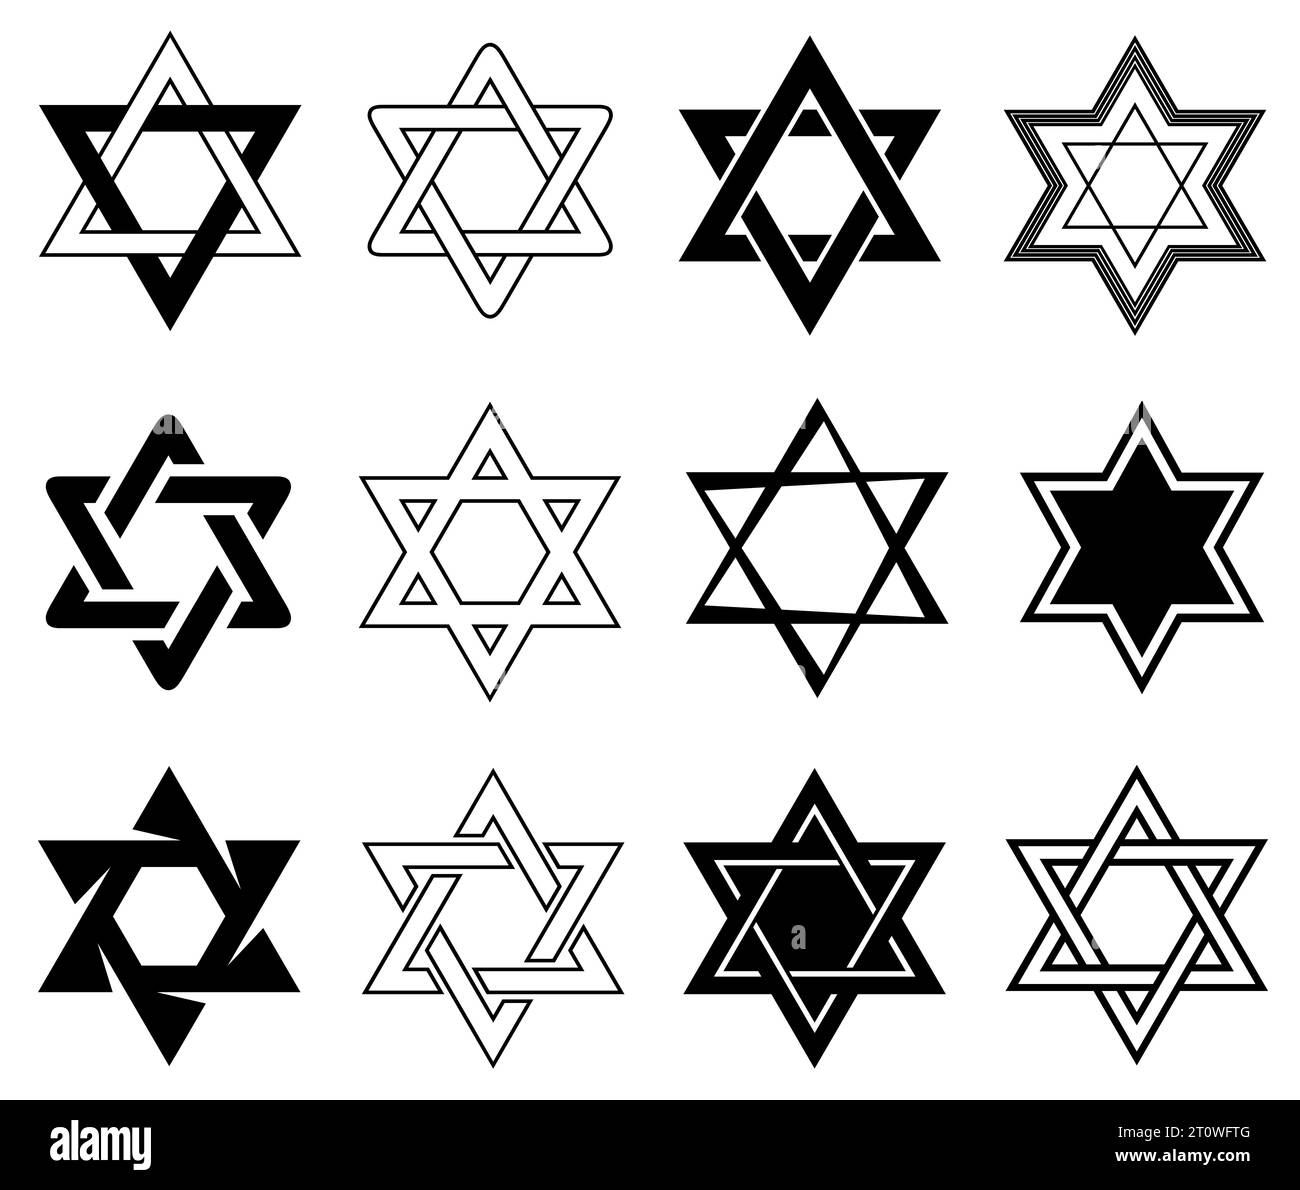 Set of different Star of David illustrations isolated on white Stock Photo